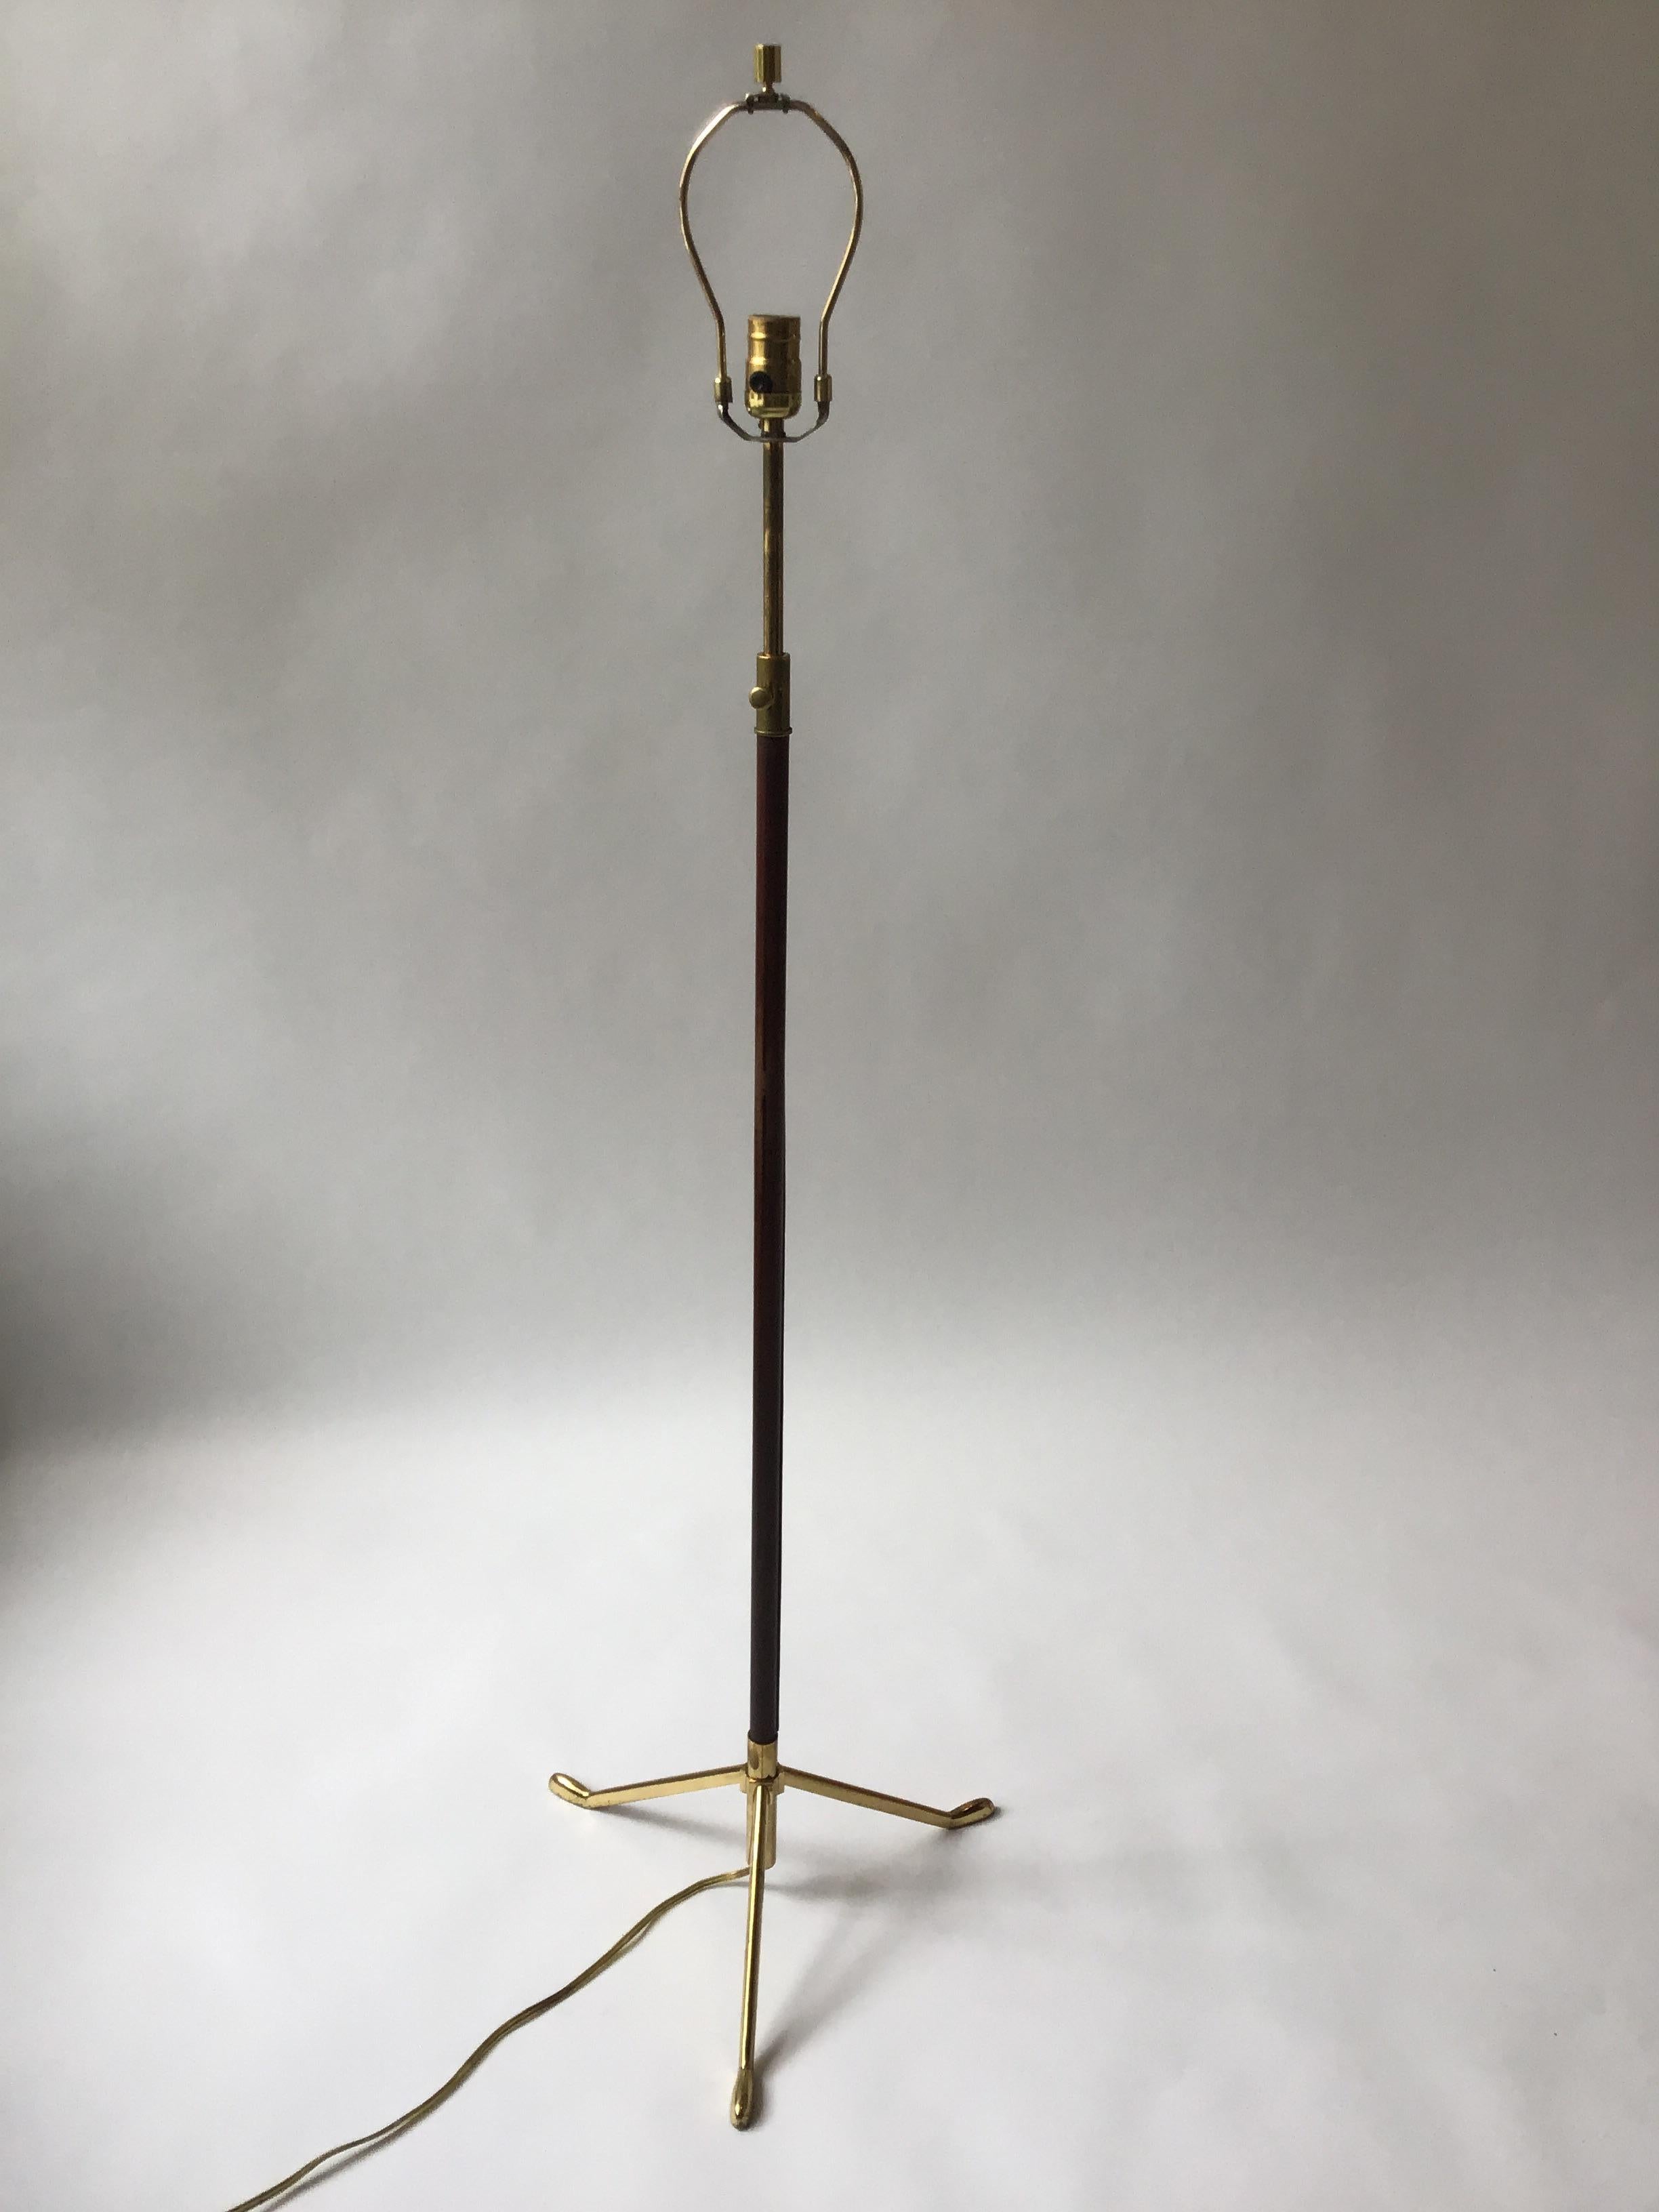 1960s Italian stitched leather floor lamp with brass frame. Adjustable.
Shade not included.